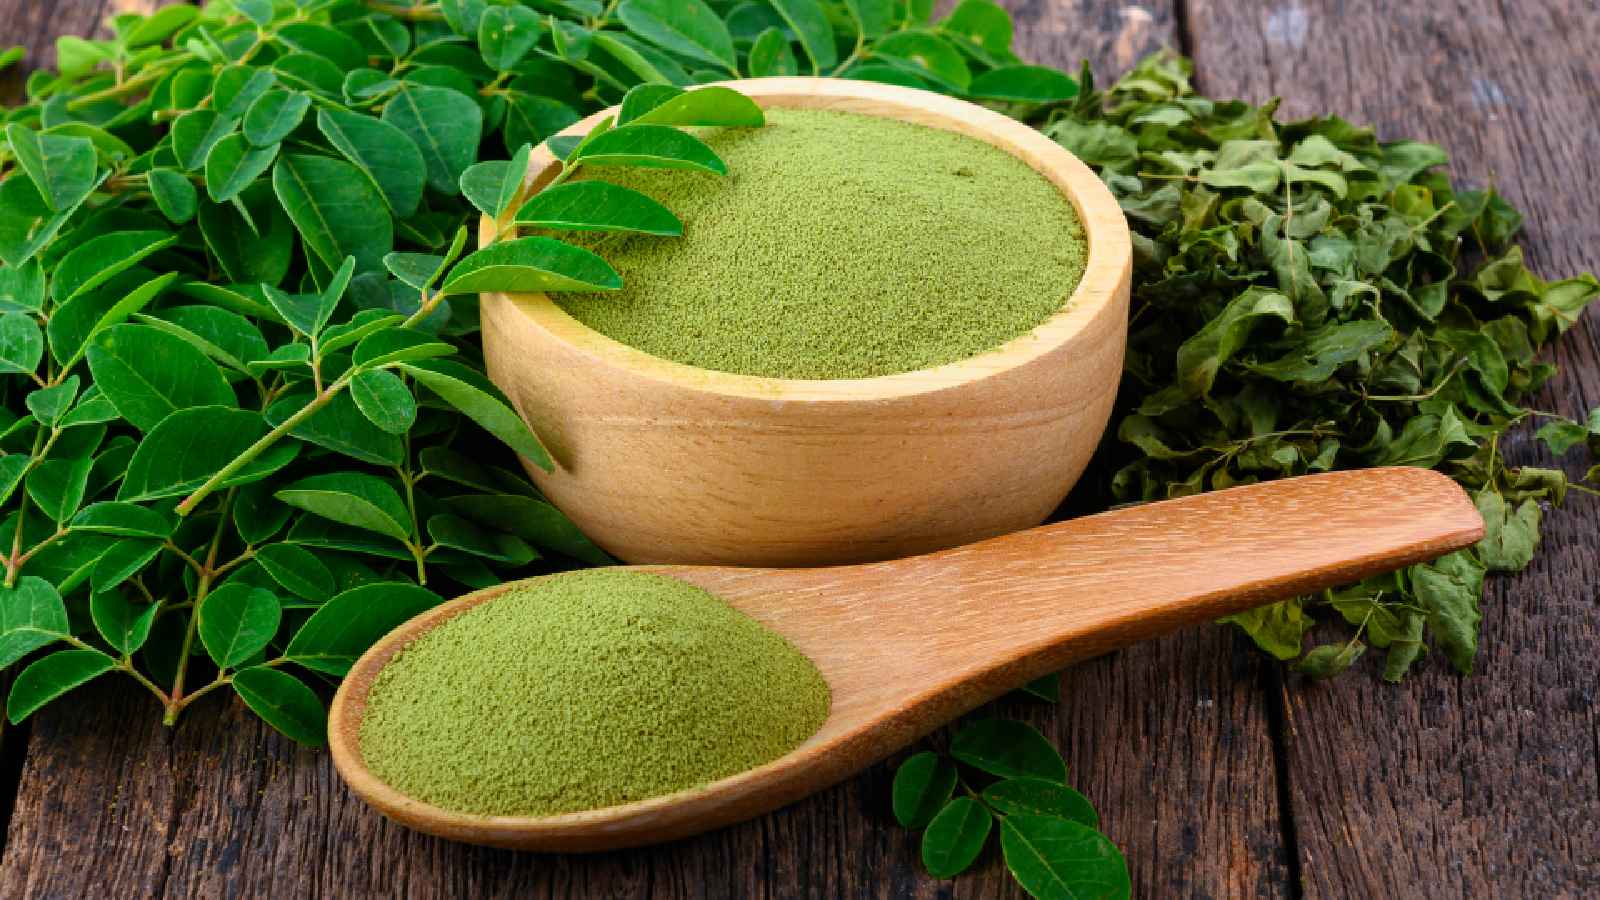 Moringa for diabetes: Can it help manage your blood sugar